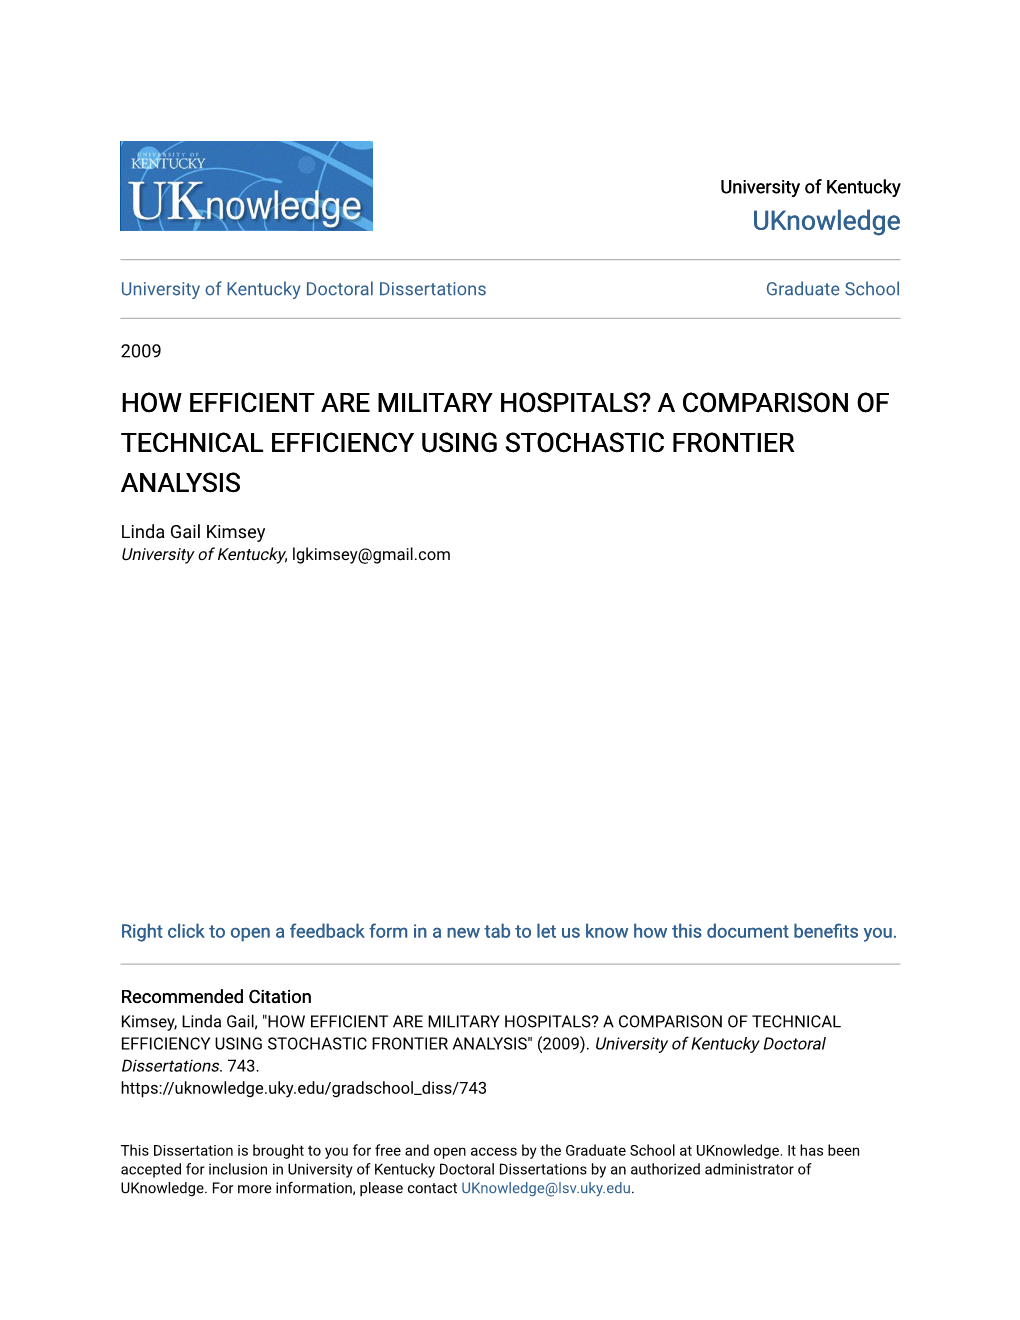 How Efficient Are Military Hospitals? a Comparison of Technical Efficiency Using Stochastic Frontier Analysis